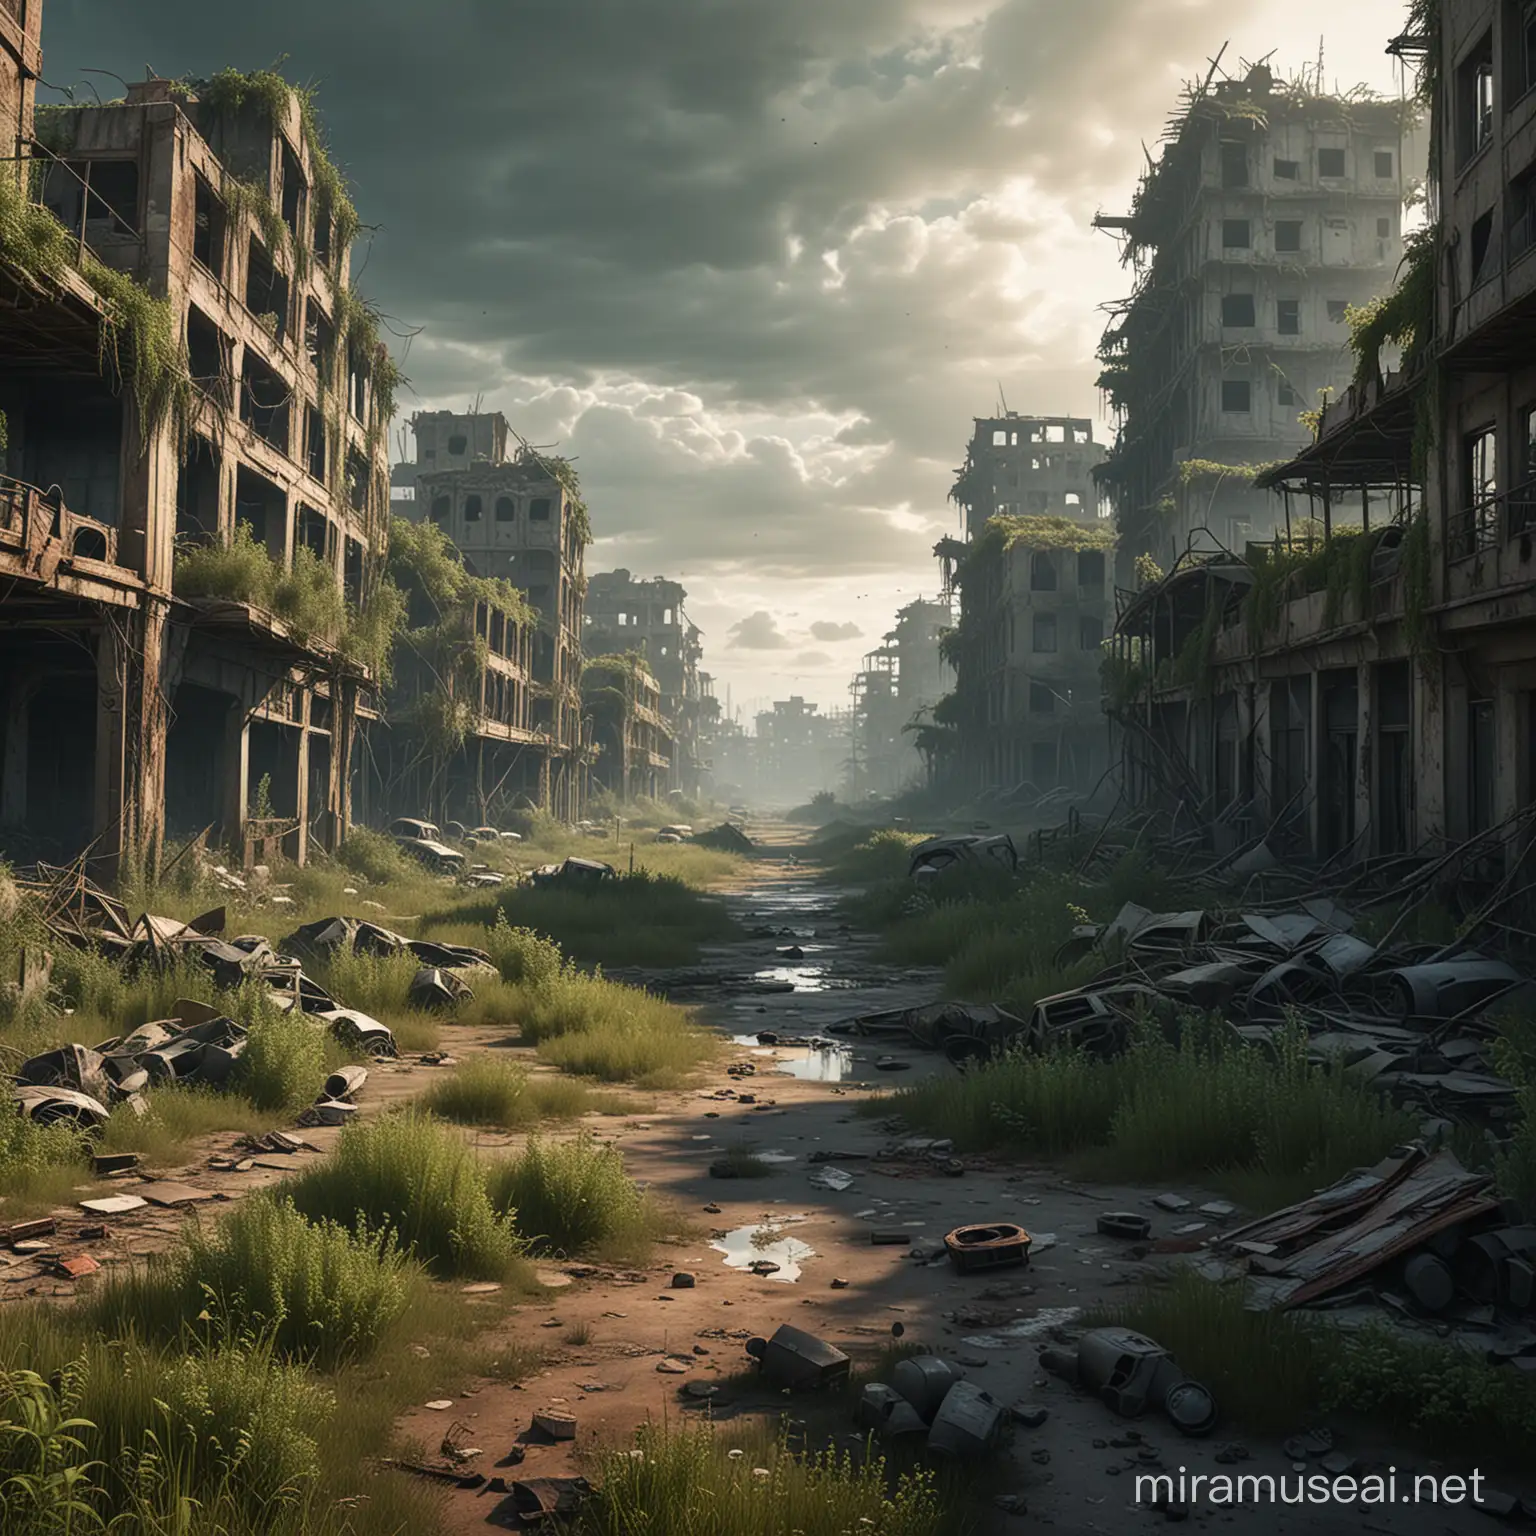 Nature Reclaiming PostApocalyptic City Overgrown with Vines and Grass